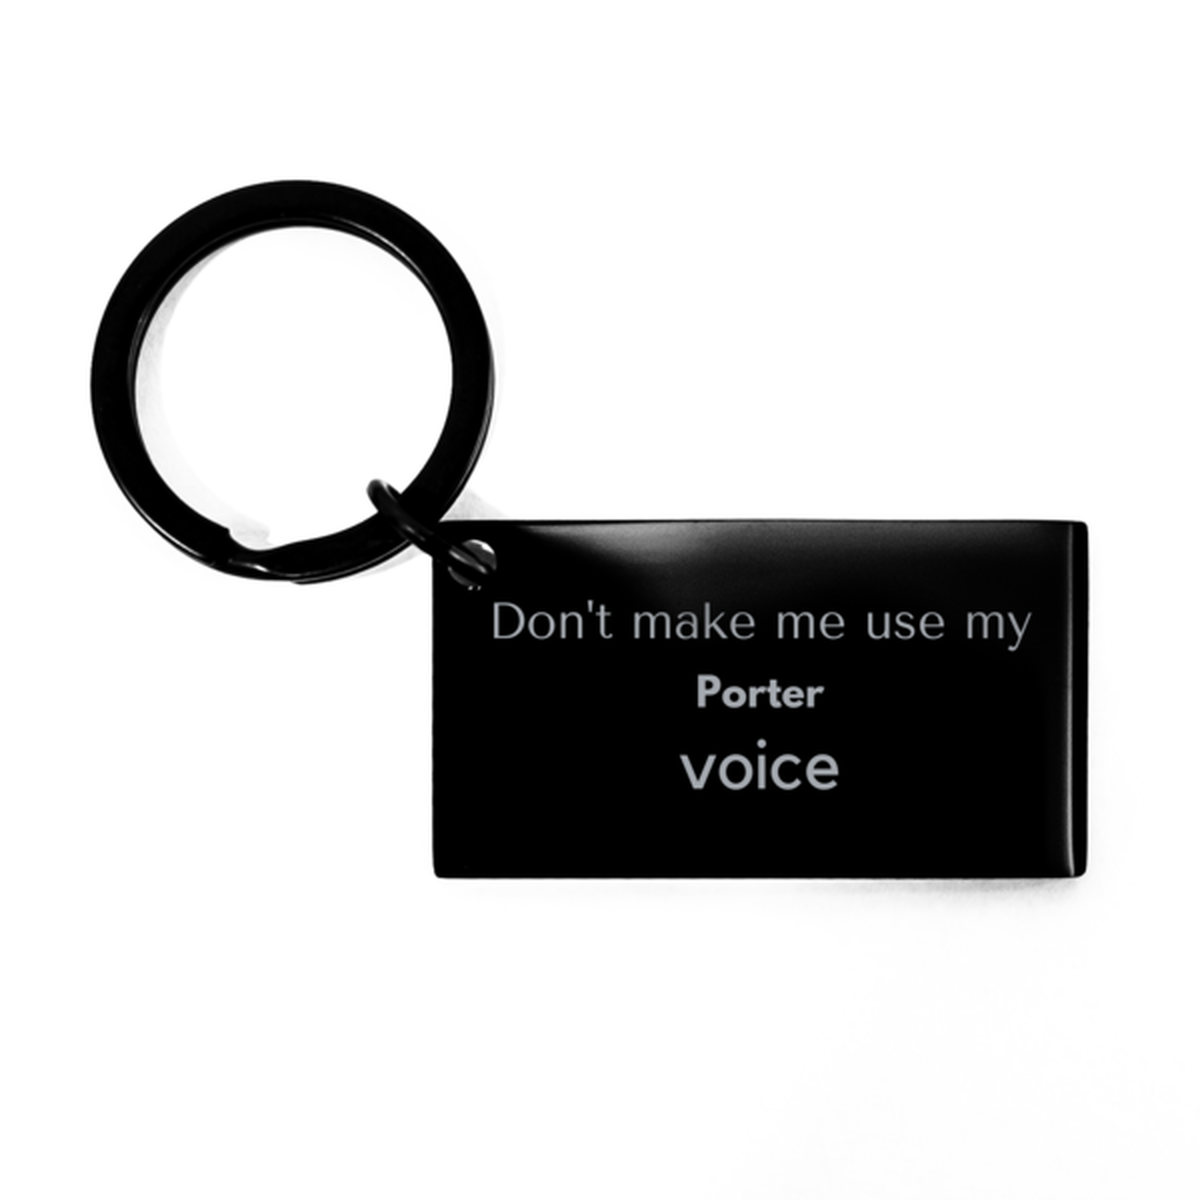 Don't make me use my Porter voice, Sarcasm Porter Gifts, Christmas Porter Keychain Birthday Unique Gifts For Porter Coworkers, Men, Women, Colleague, Friends